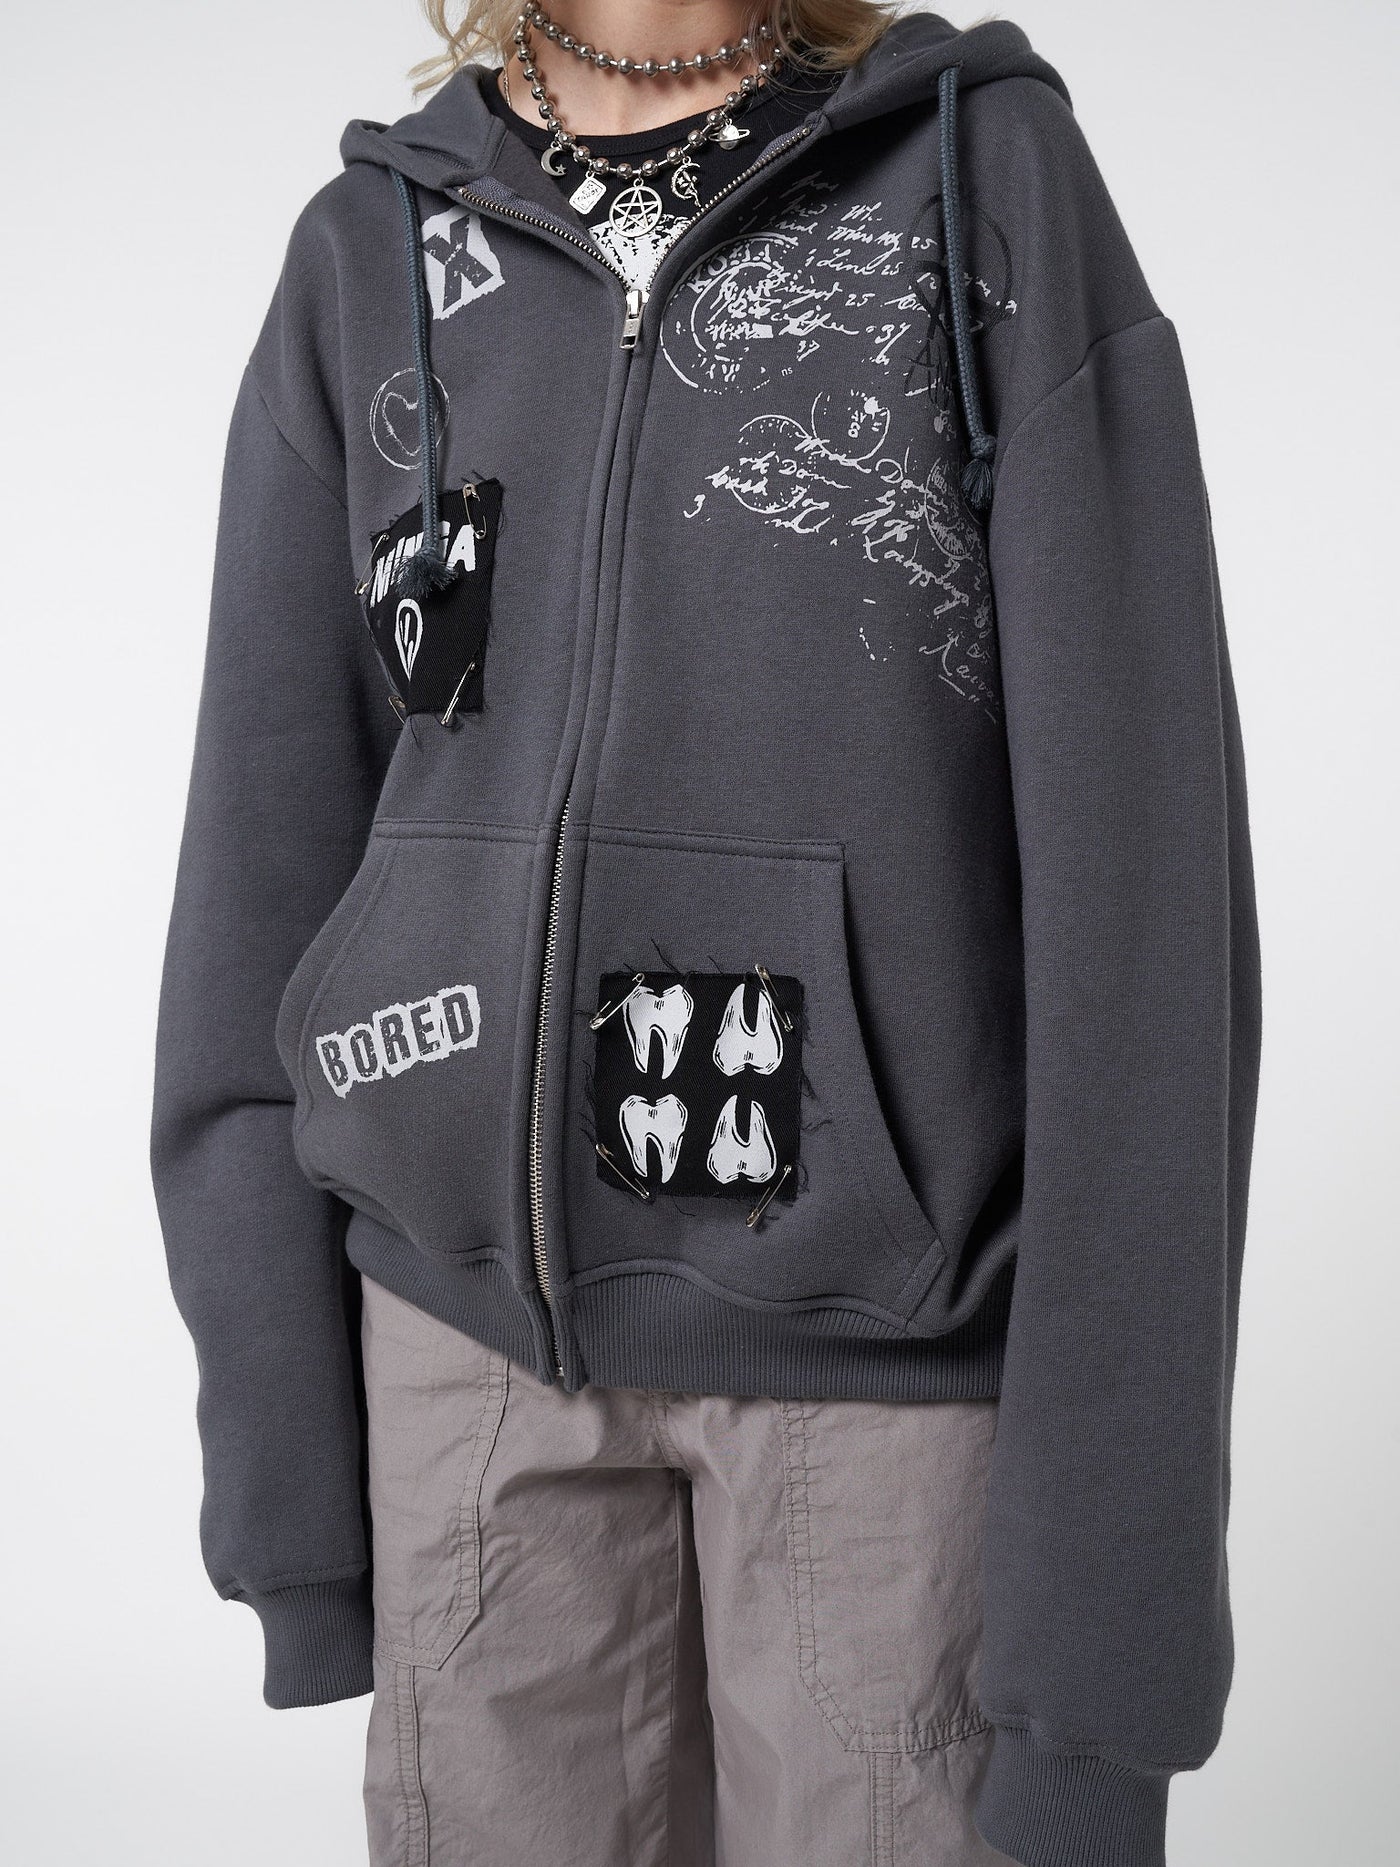 Zip up hoodie jacket in grey with front prints, patches and safety pins